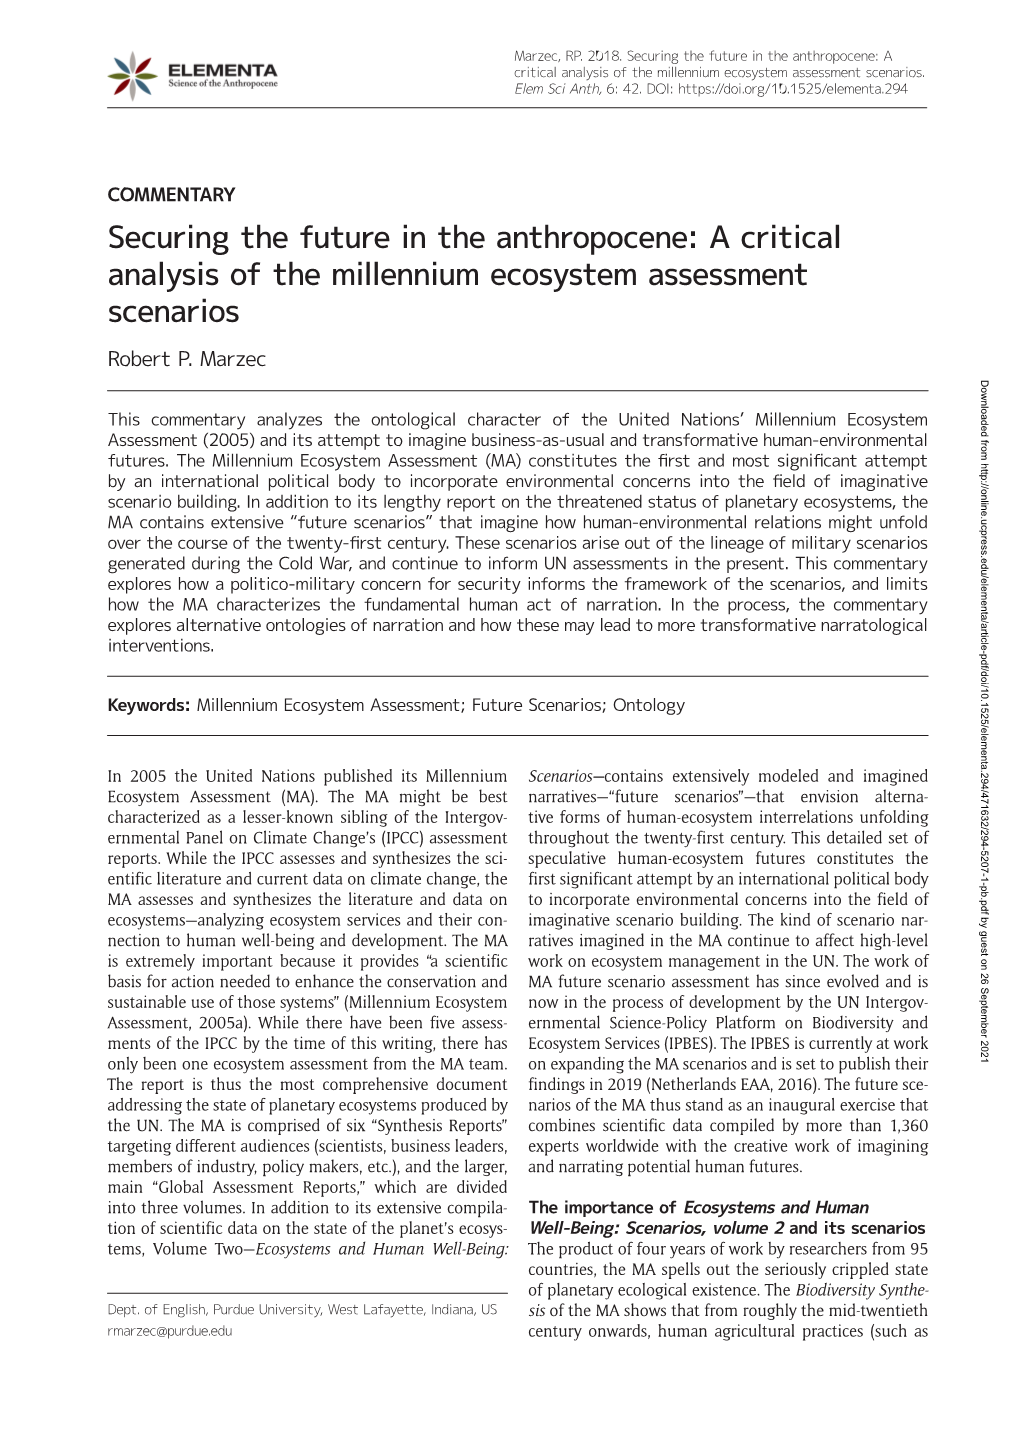 Securing the Future in the Anthropocene: a Critical Analysis of the Millennium Ecosystem Assessment Scenarios